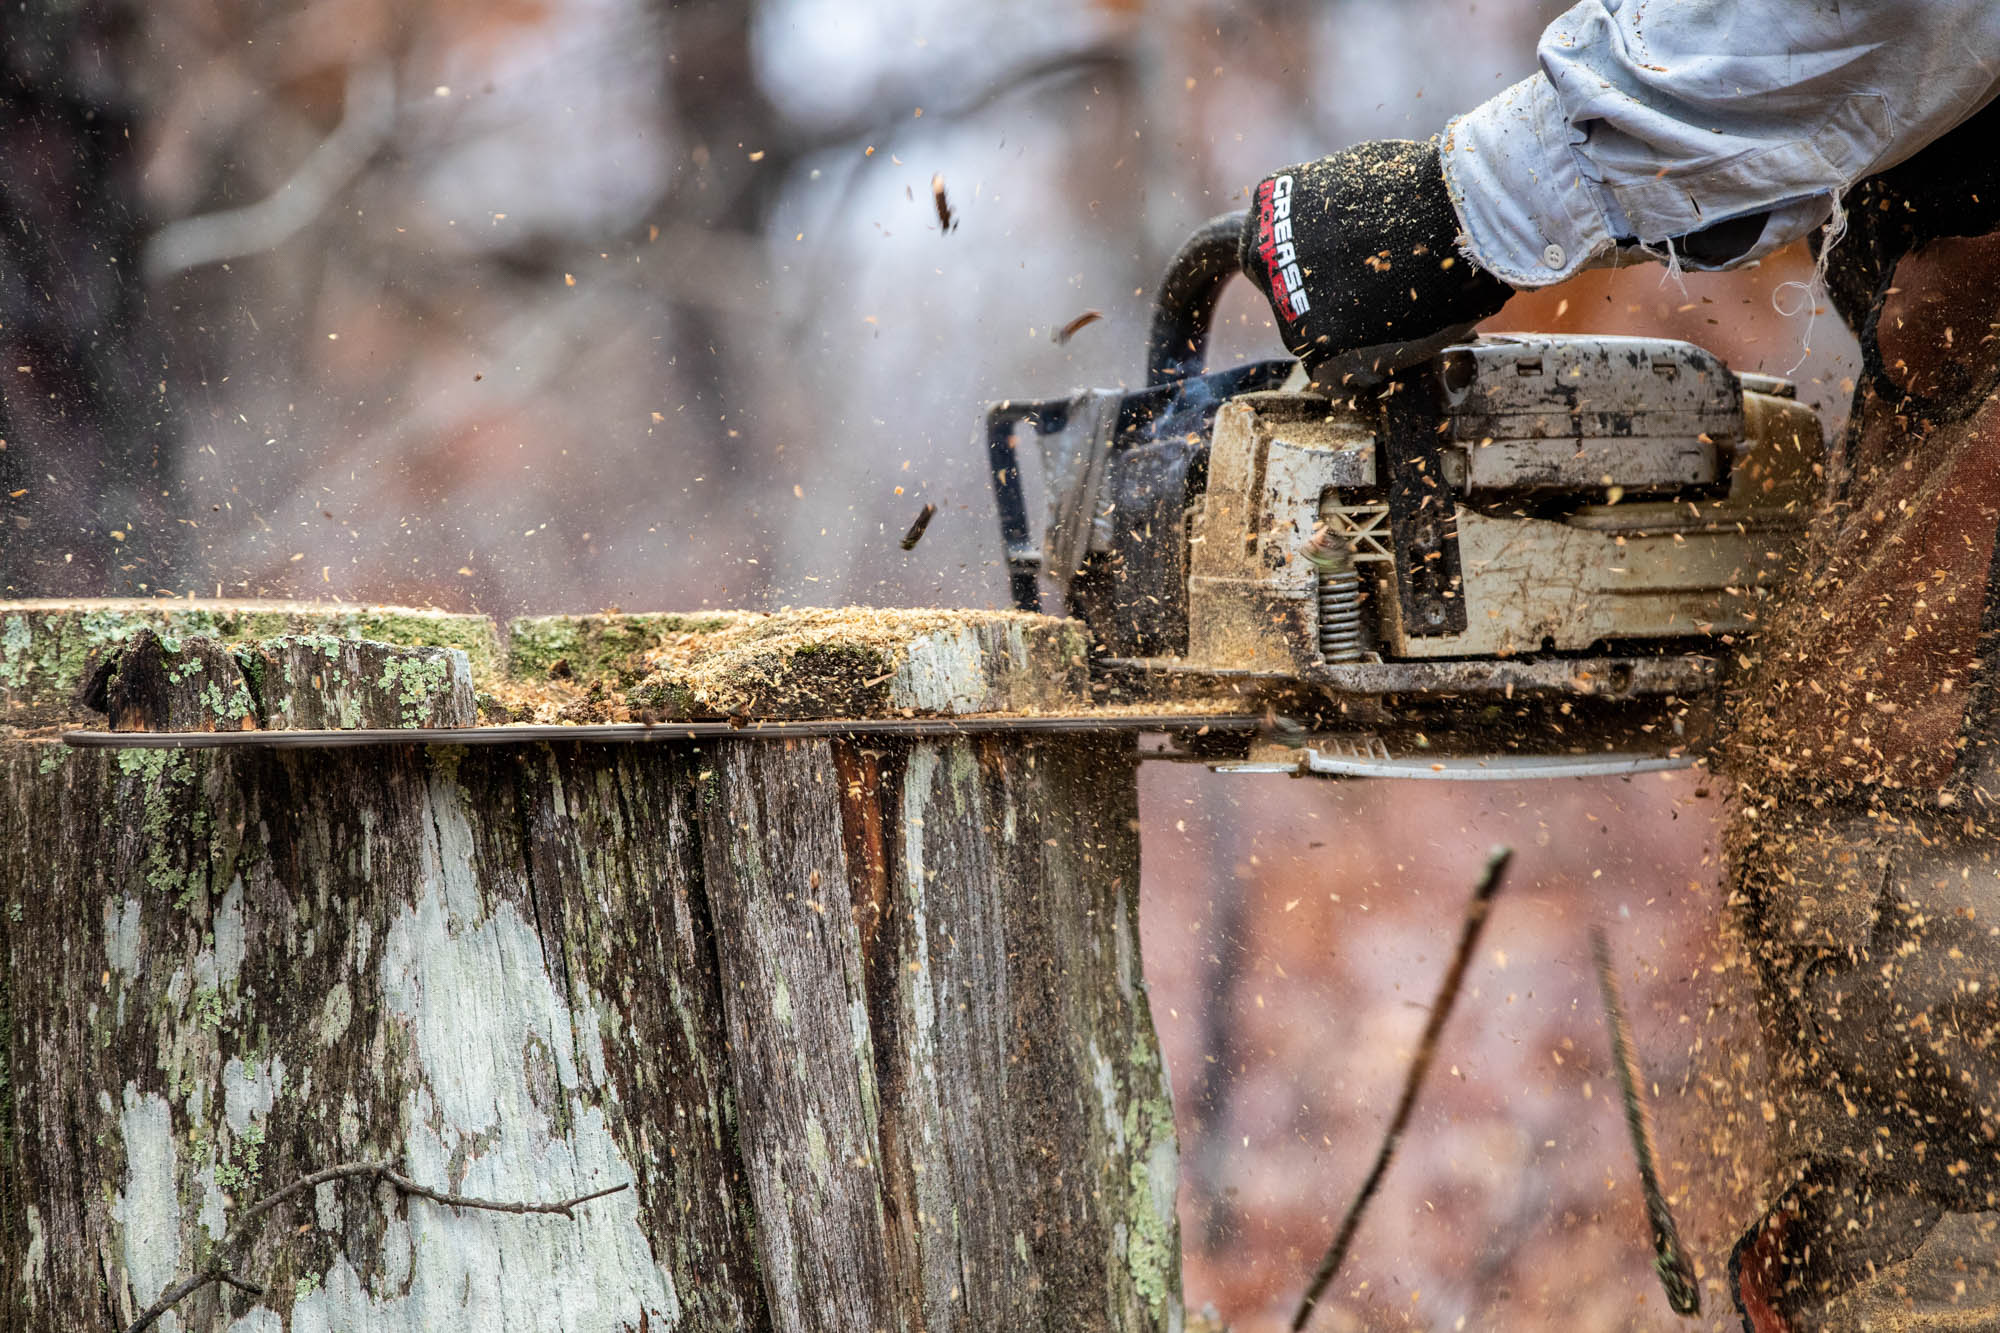 Sawing a piece of tree stump off.